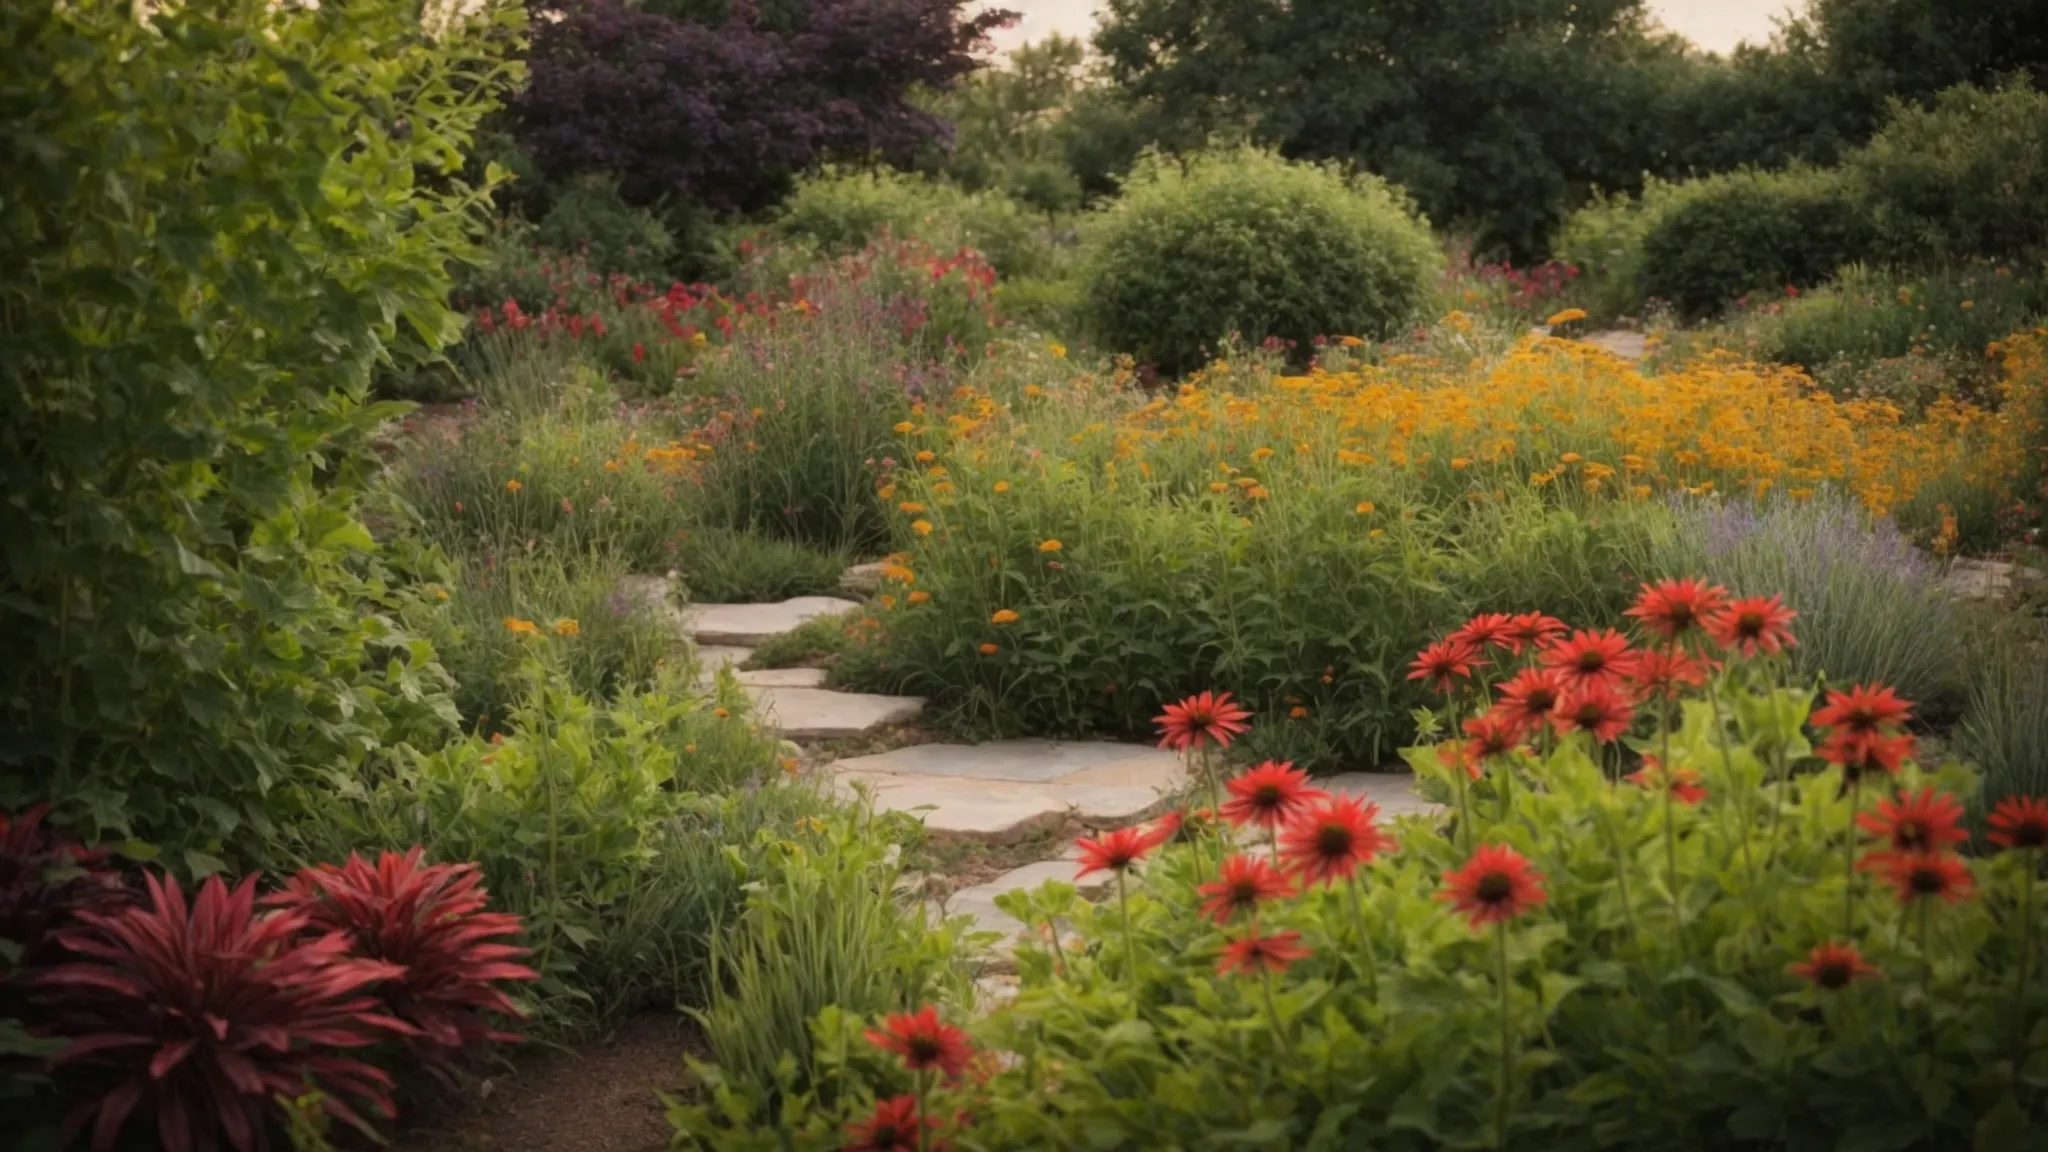 Create an image showcasing a vibrant, lush garden in Pennsylvania filled with drought-tolerant plants. Include colorful coneflowers, hardy sedums, and ornamental grasses, all thriving in the arid landscape.